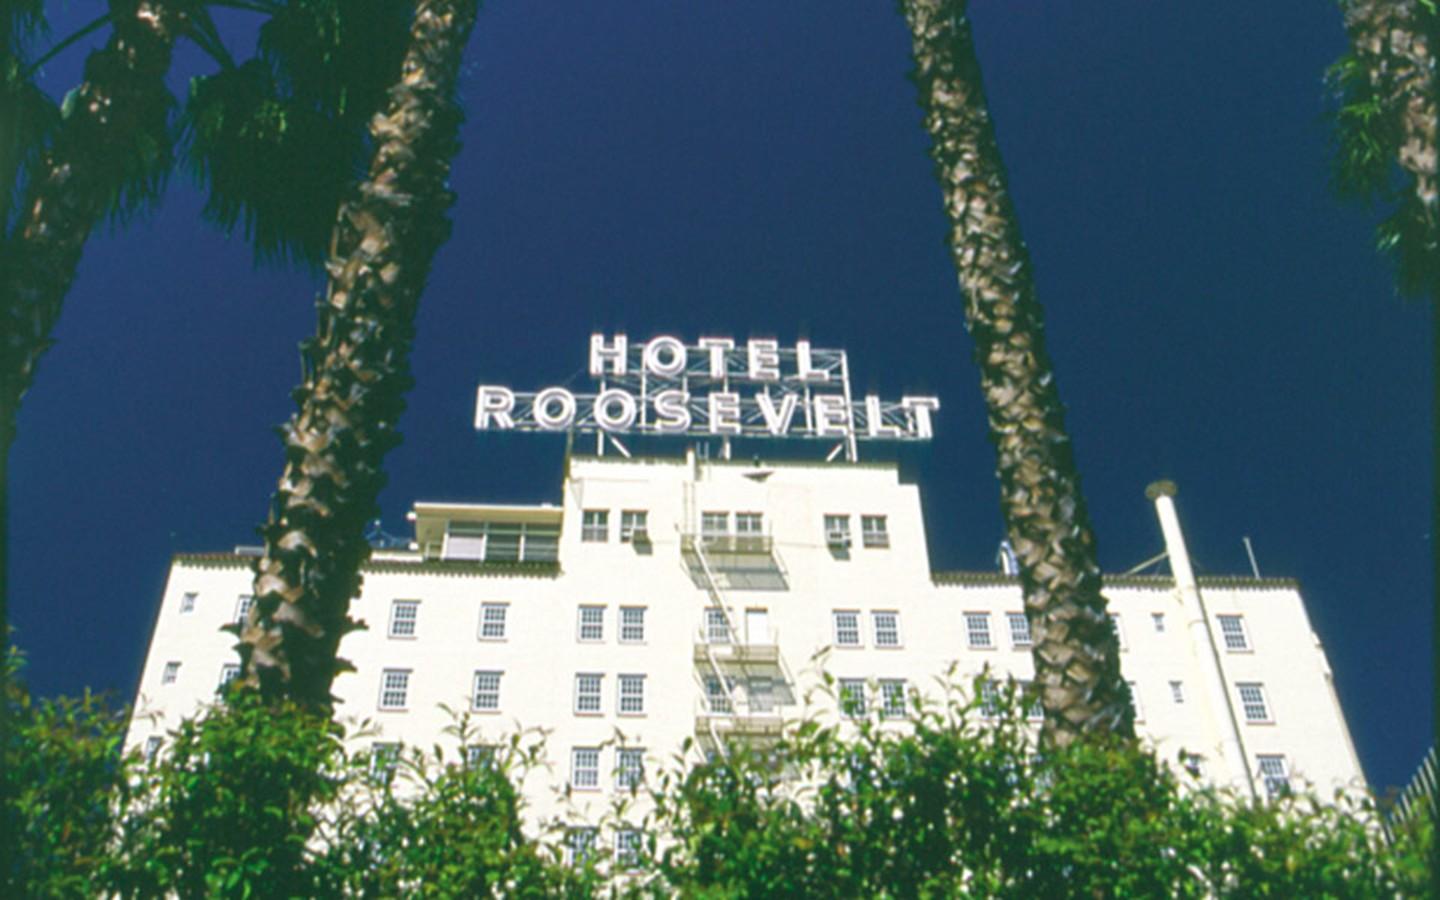 The Hollywood Roosevelt Hotel Los Angeles Exterior foto